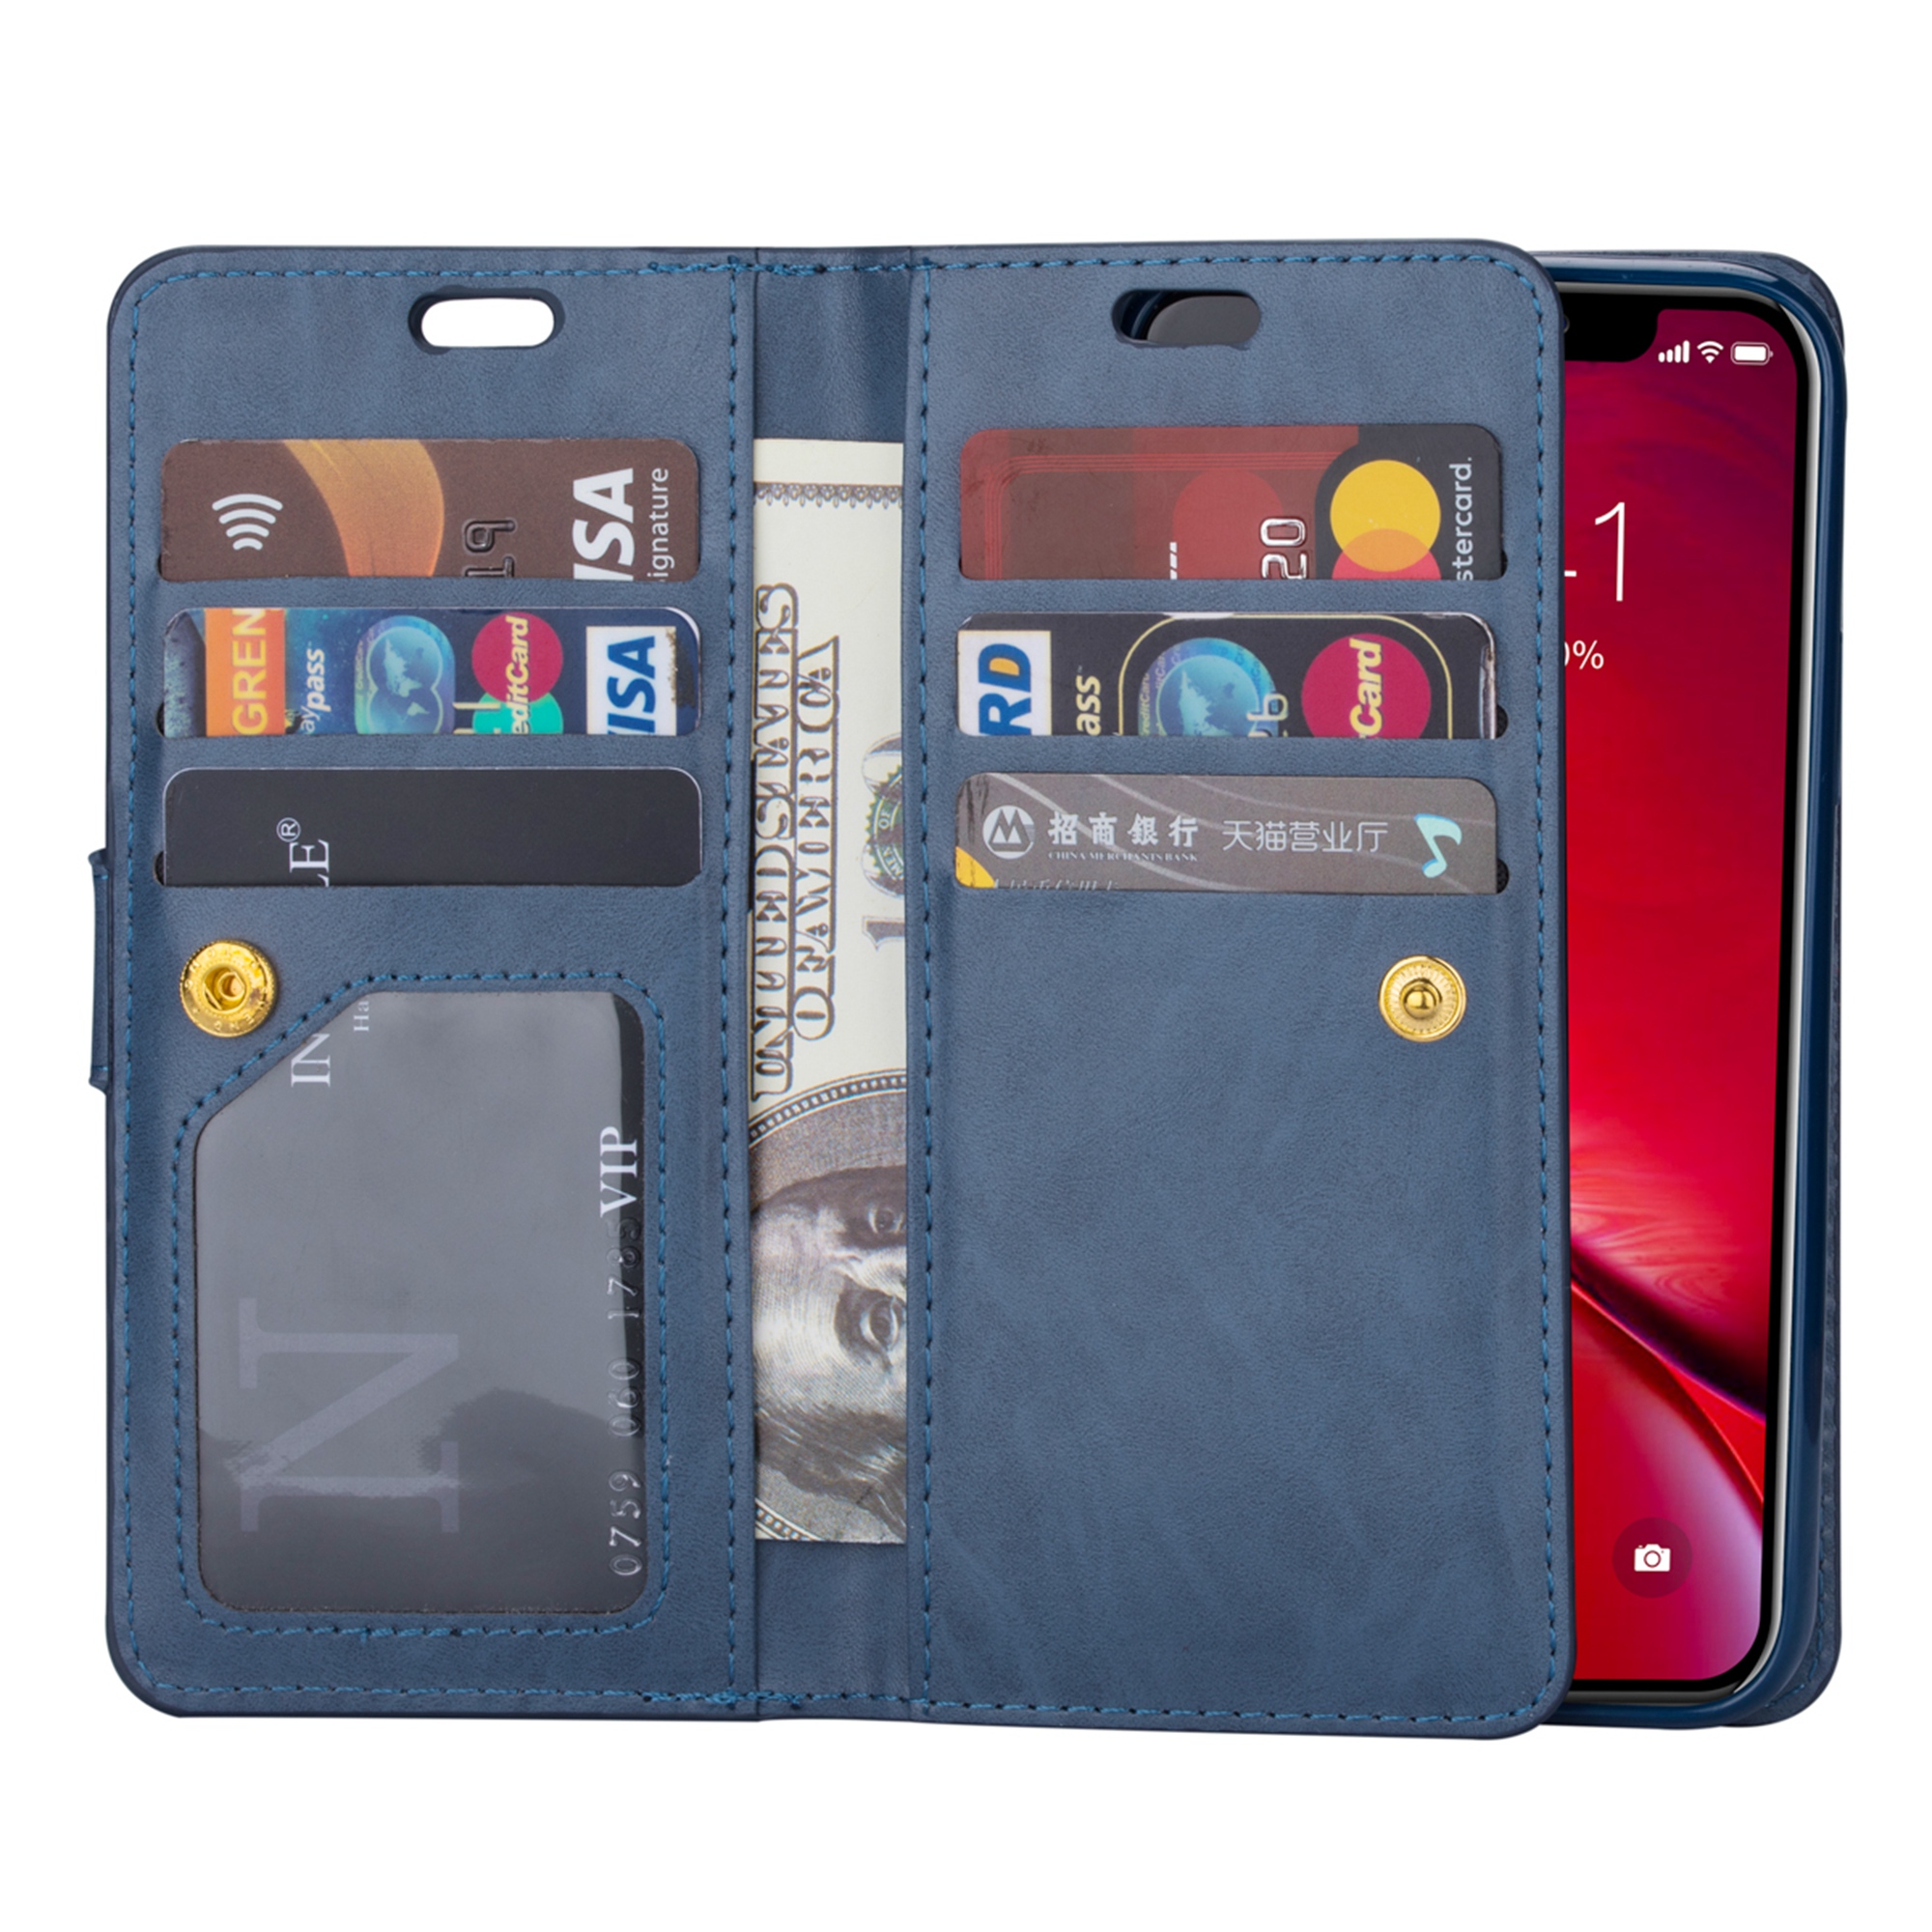 iPhone 11 Pro Max 6.5 inch Wallet Case, Dteck 9 Card Slots Premium Leather Zipper Purse case Flip Kickstand Folio Magnetic with Wrist Strap Credit Cash Cover For Apple iPhone 11 Pro Max, Blue - image 4 of 7